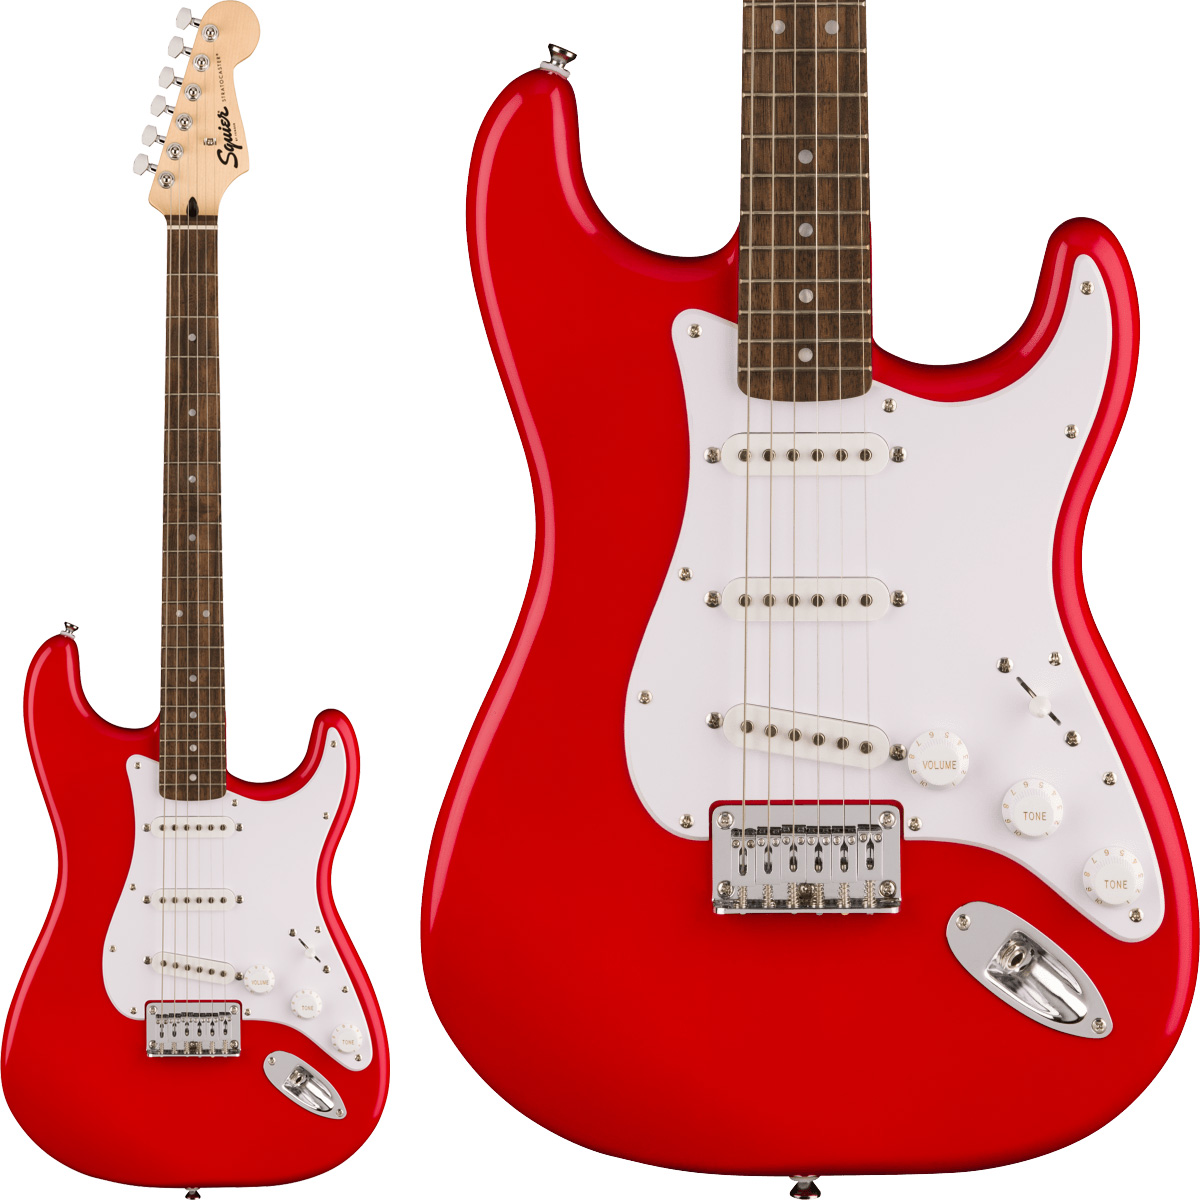 Squier by Fender SONIC STRATOCASTER HT Laurel Fingerboard White Pickguard Torino Red ストラトキャスター ハードテイル エレキギター 